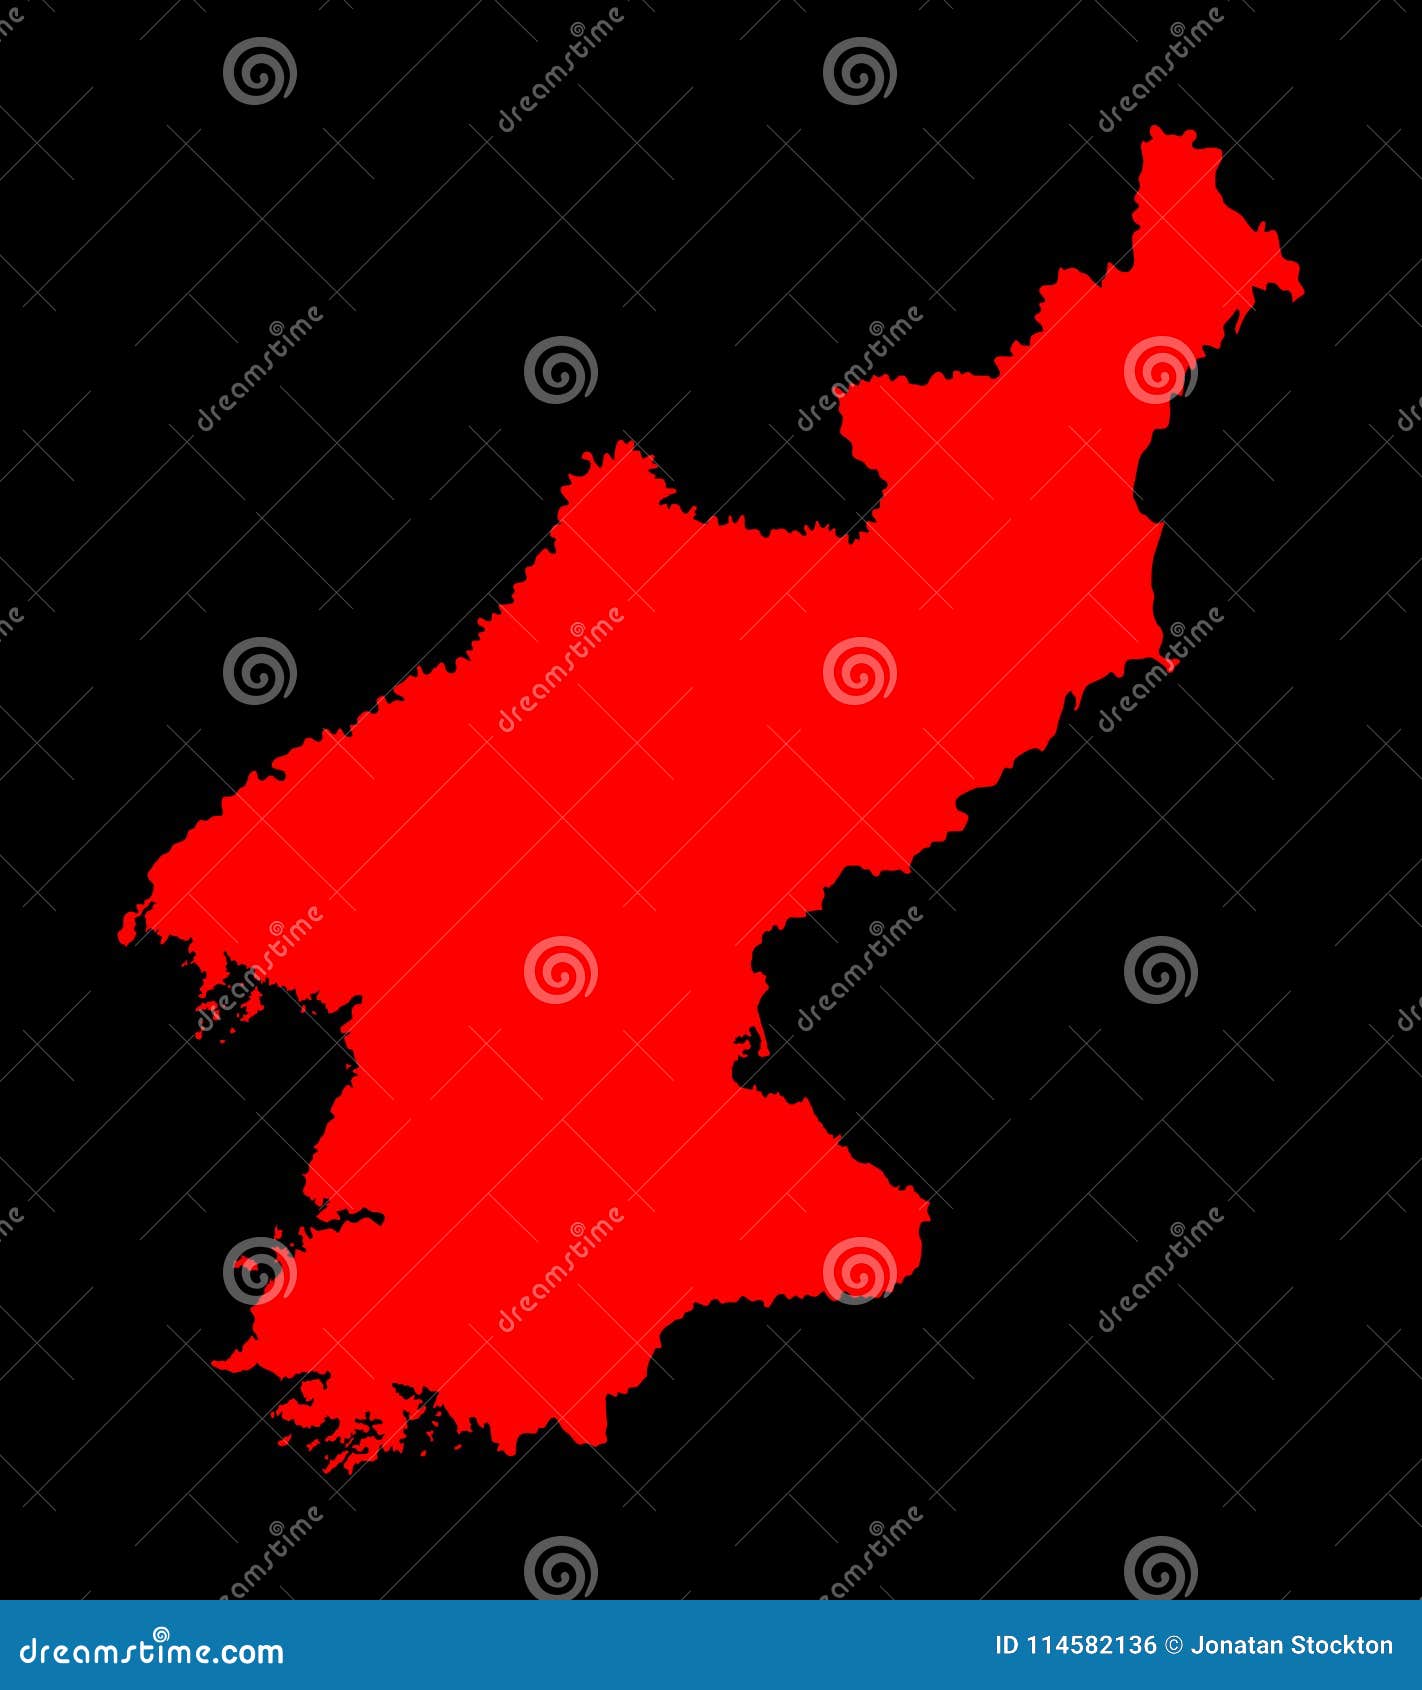 Red Map of North Korea Isolated on Black Background. Stock Illustration ...